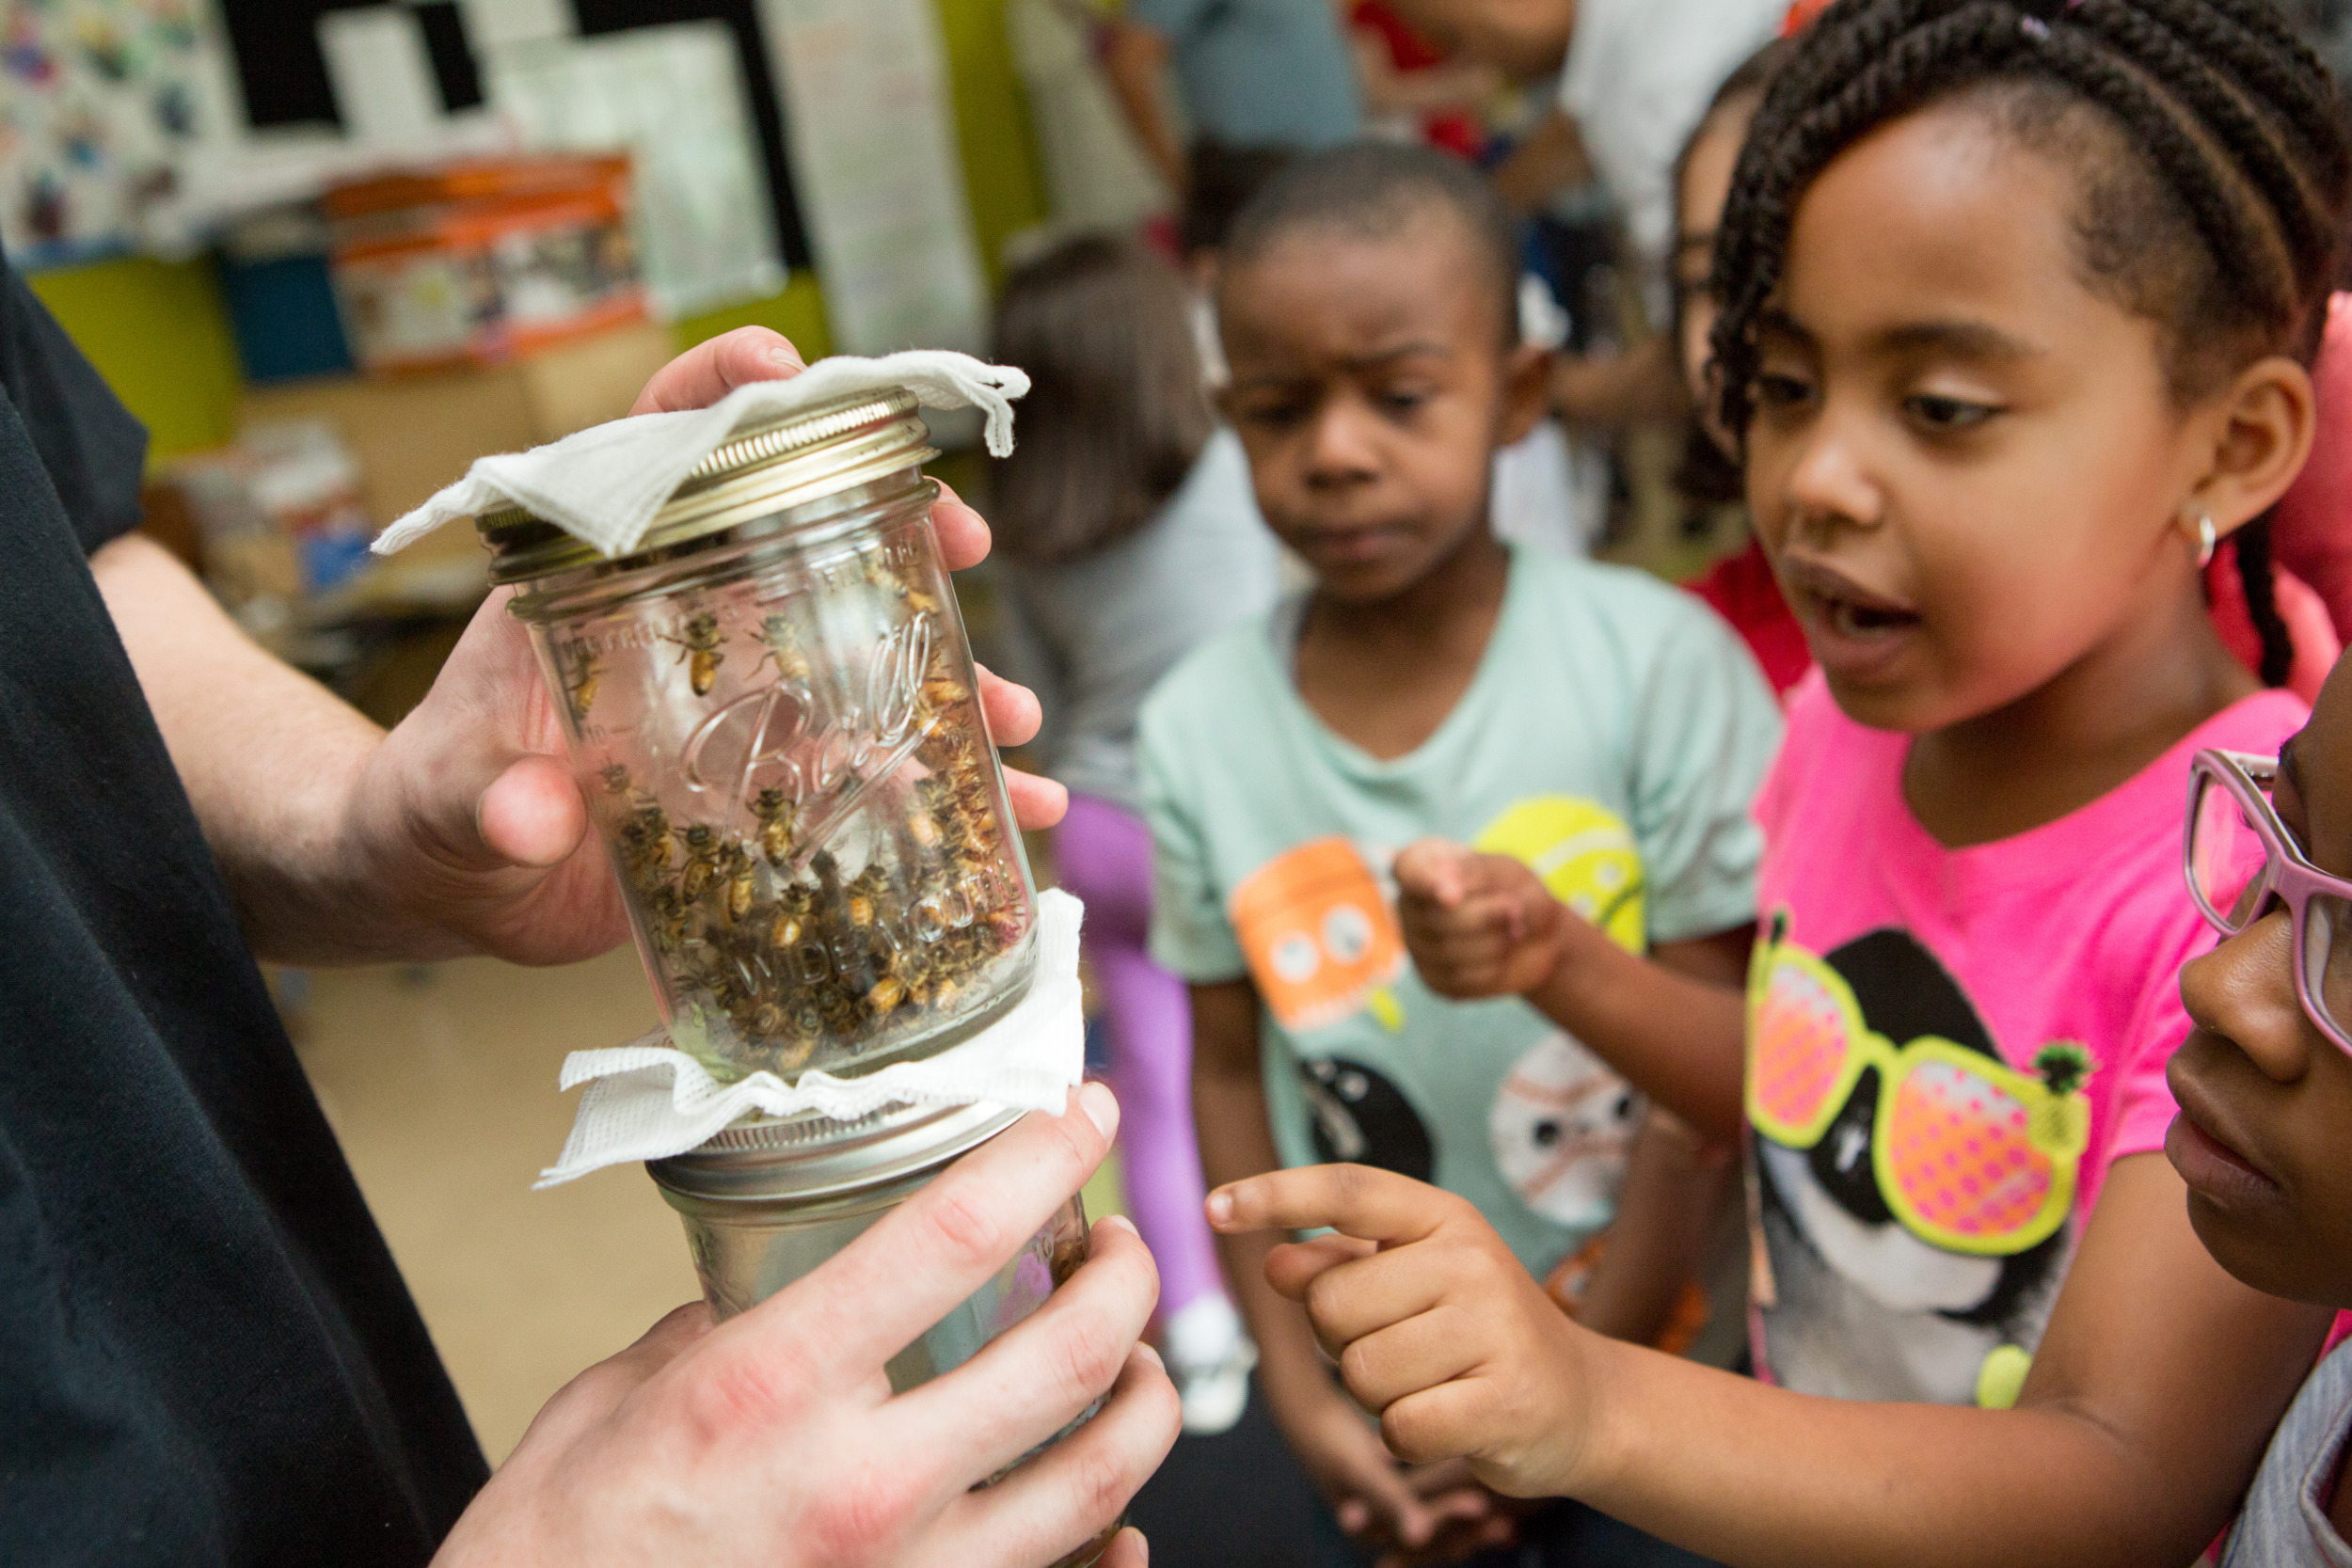 Science and Reading: Closeup of young black girl and boy staring closely at two glass jars full of bees held by adult.